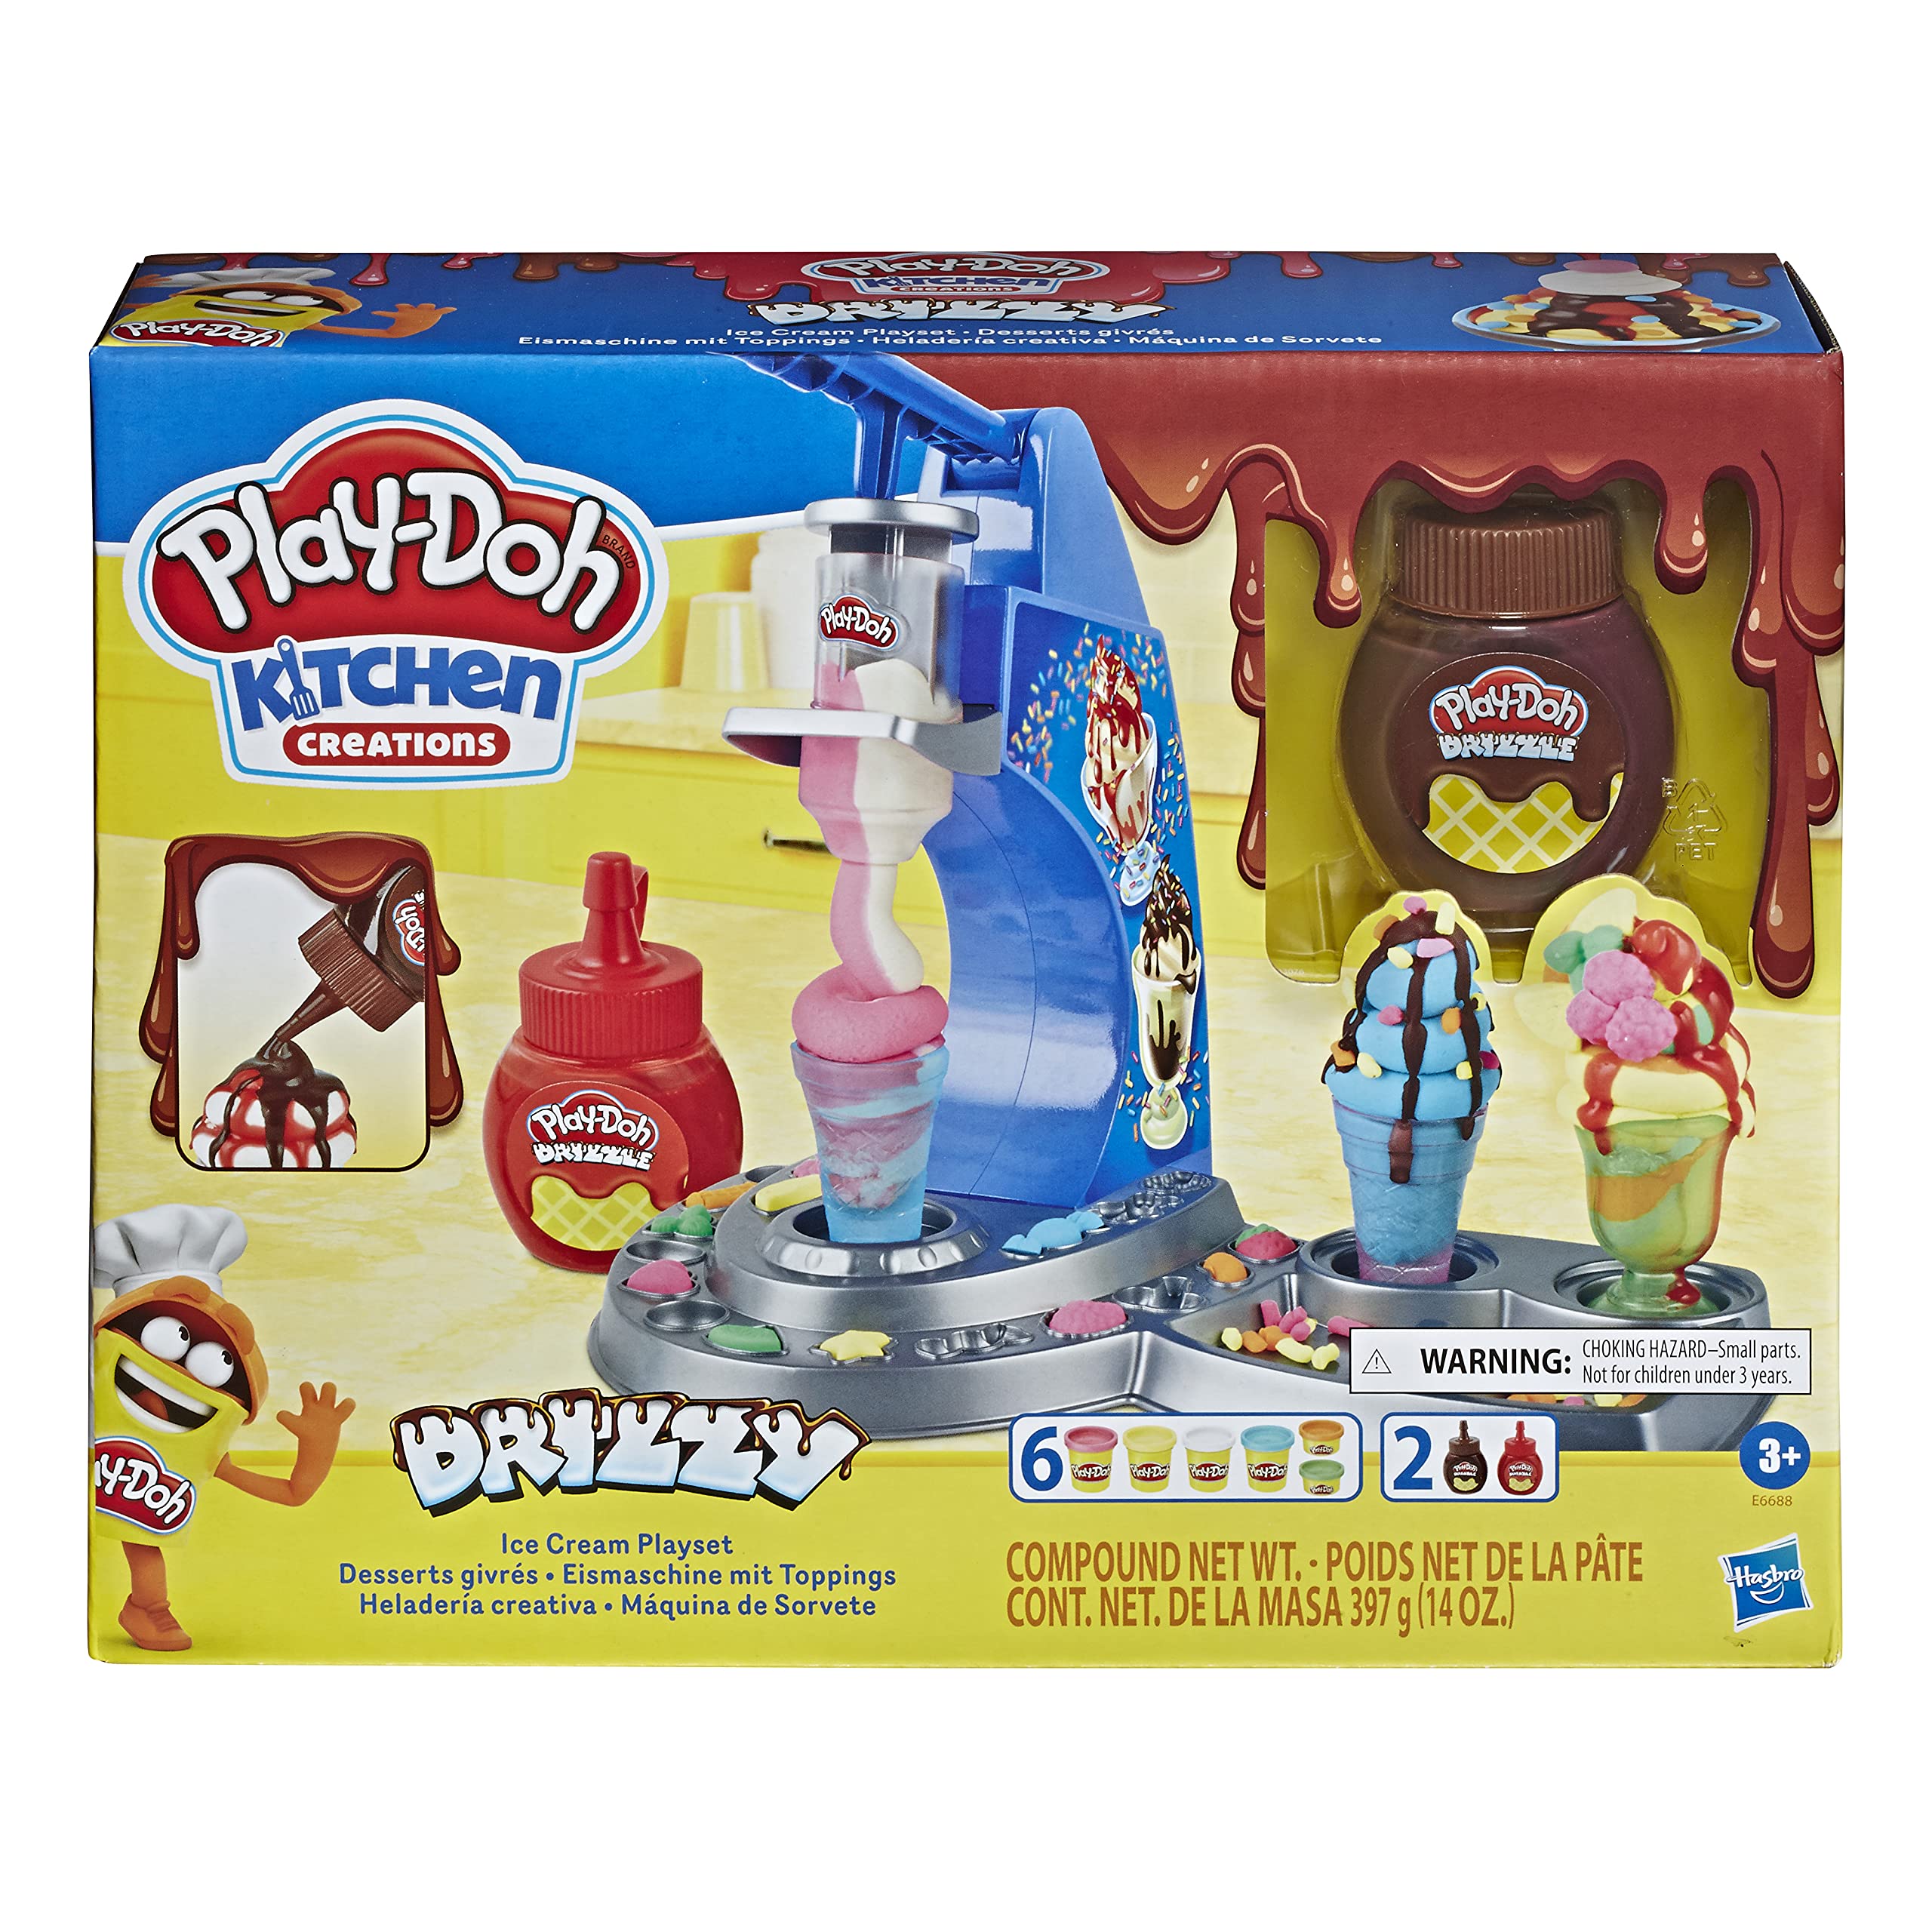 Hasbro-Play-Doh Kitchen Creations Drizzy Ice Cream Playset-E6688-Legacy Toys